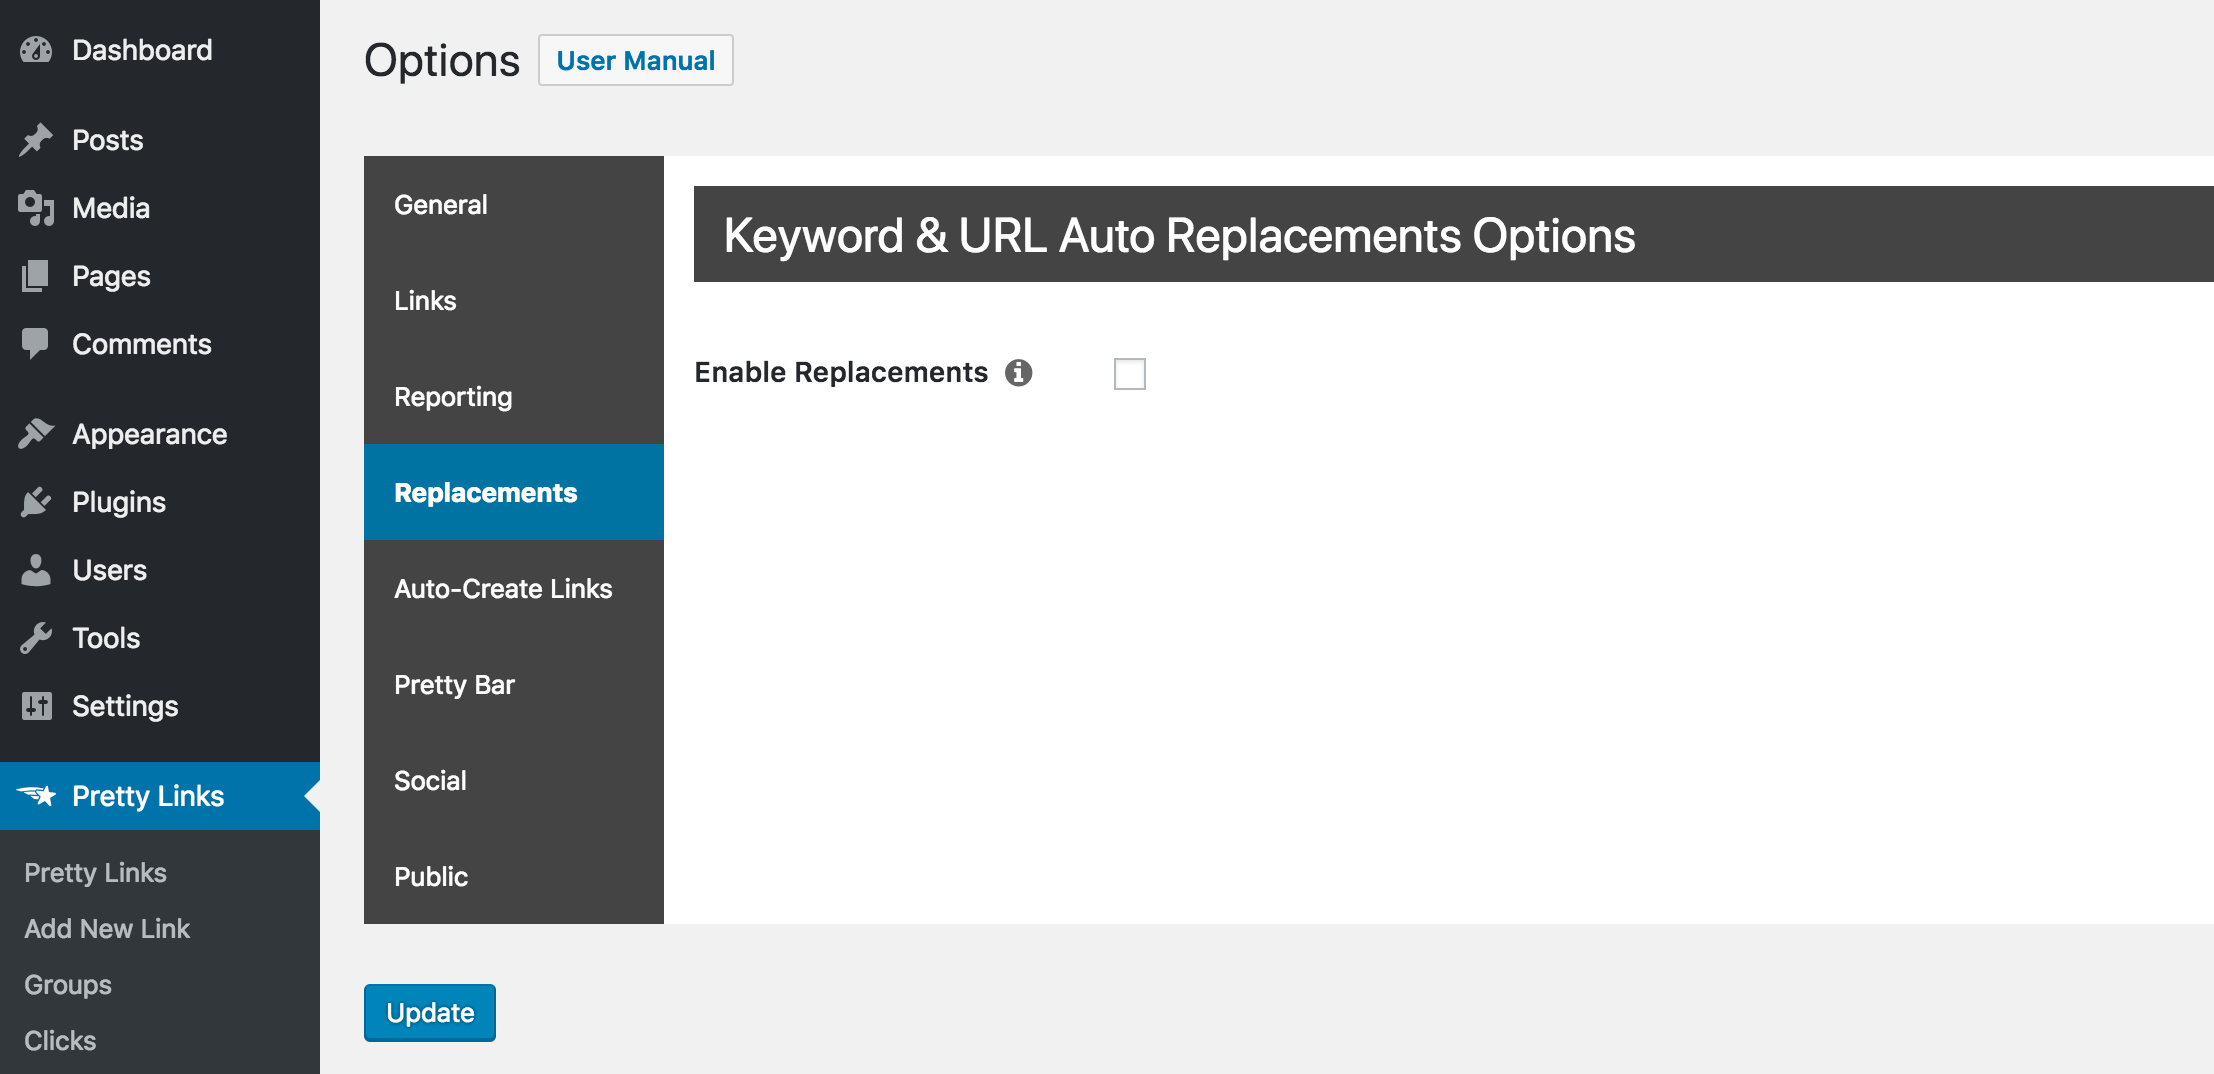 The Keyword & URL Auto Replacements Options in Pretty Links.